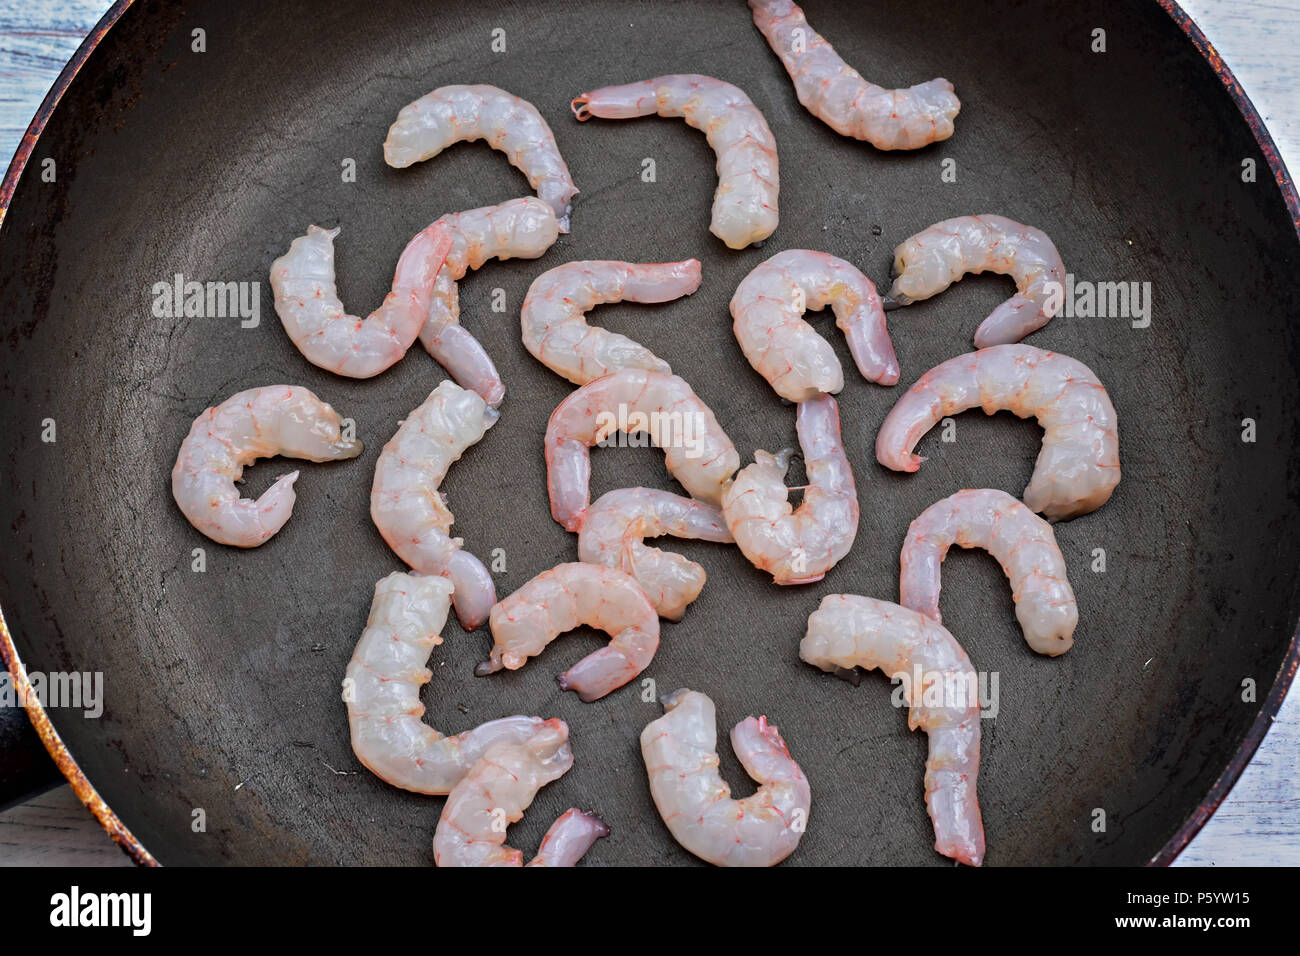 Fresh raw shrimp tails in old black cooking pot/ Food preparation/ Sea food background Stock Photo